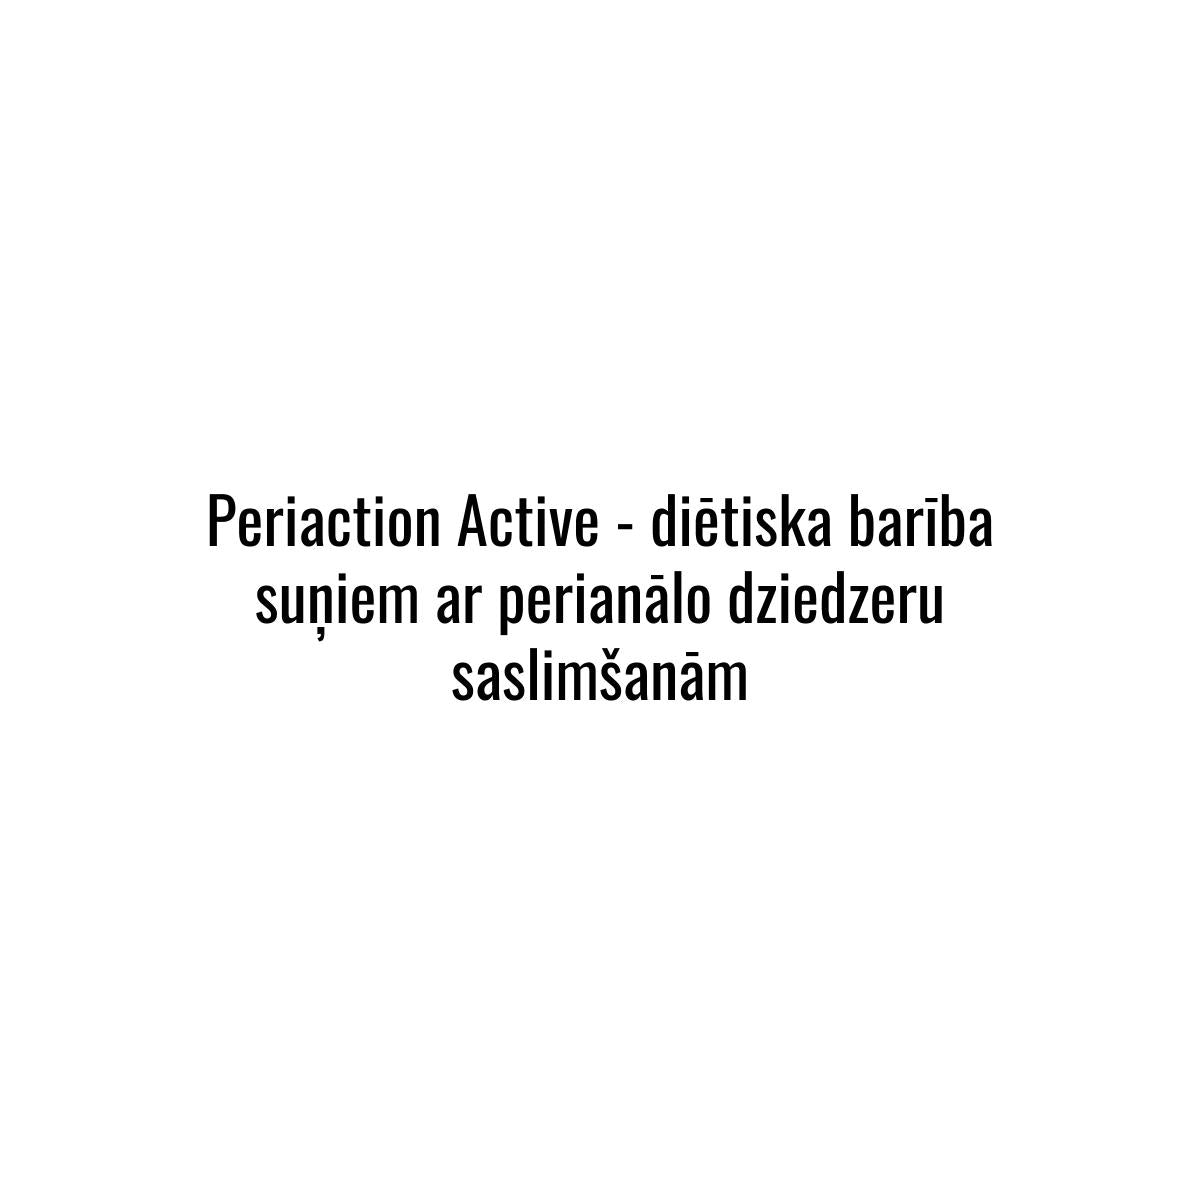 Periaction Active